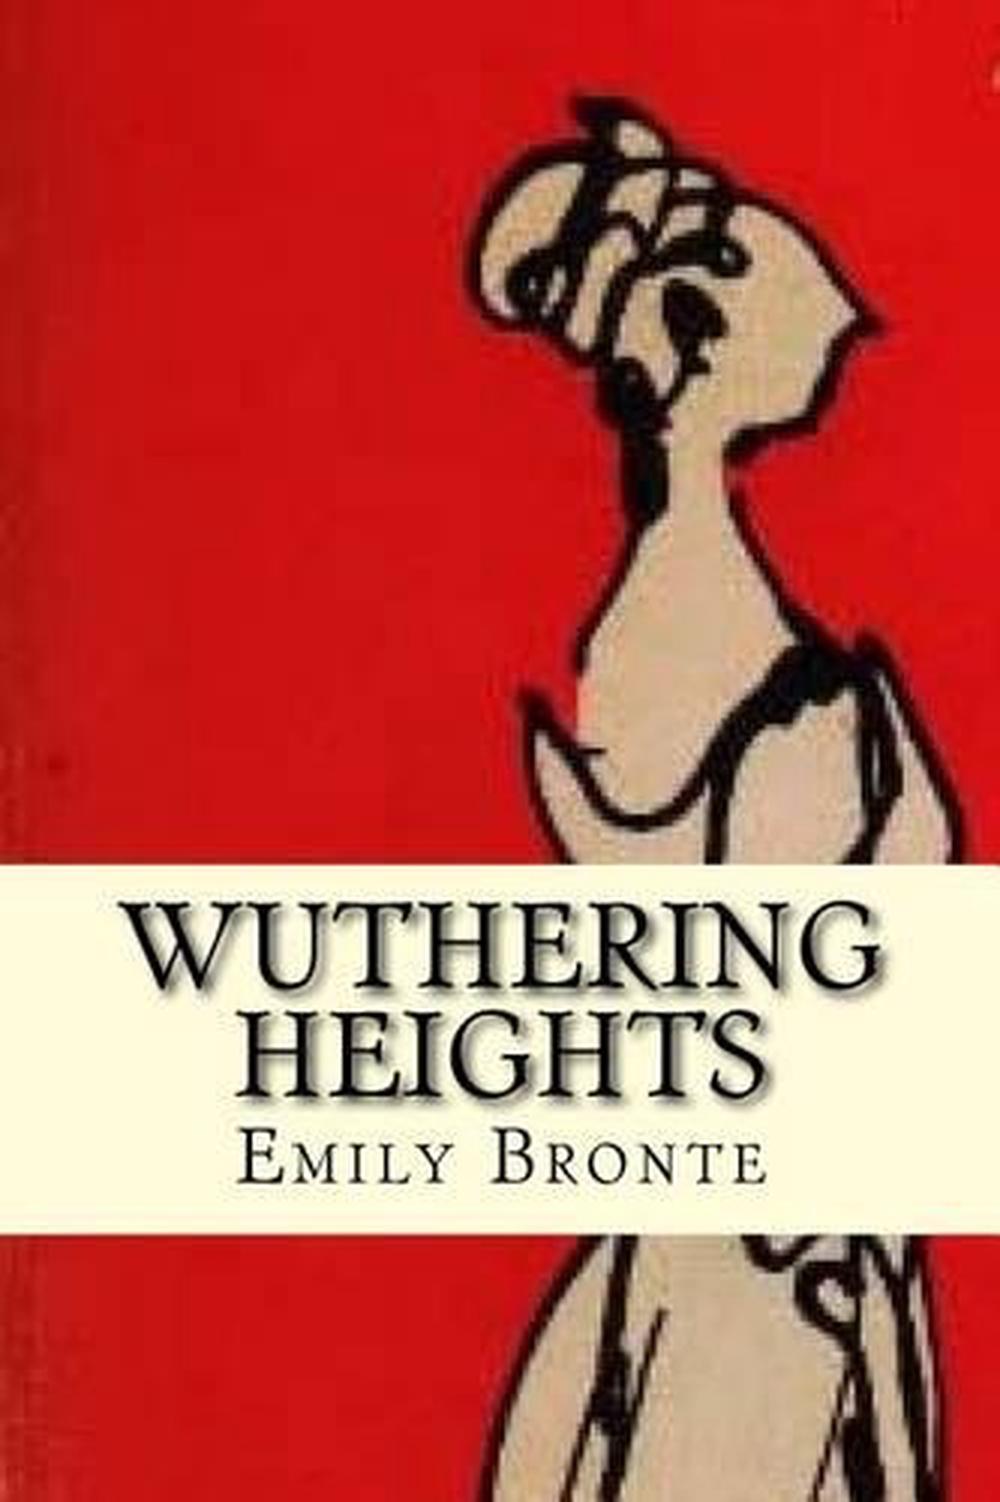 Wuthering Heights by Emily Bront (English) Paperback Book Free Shipping ...